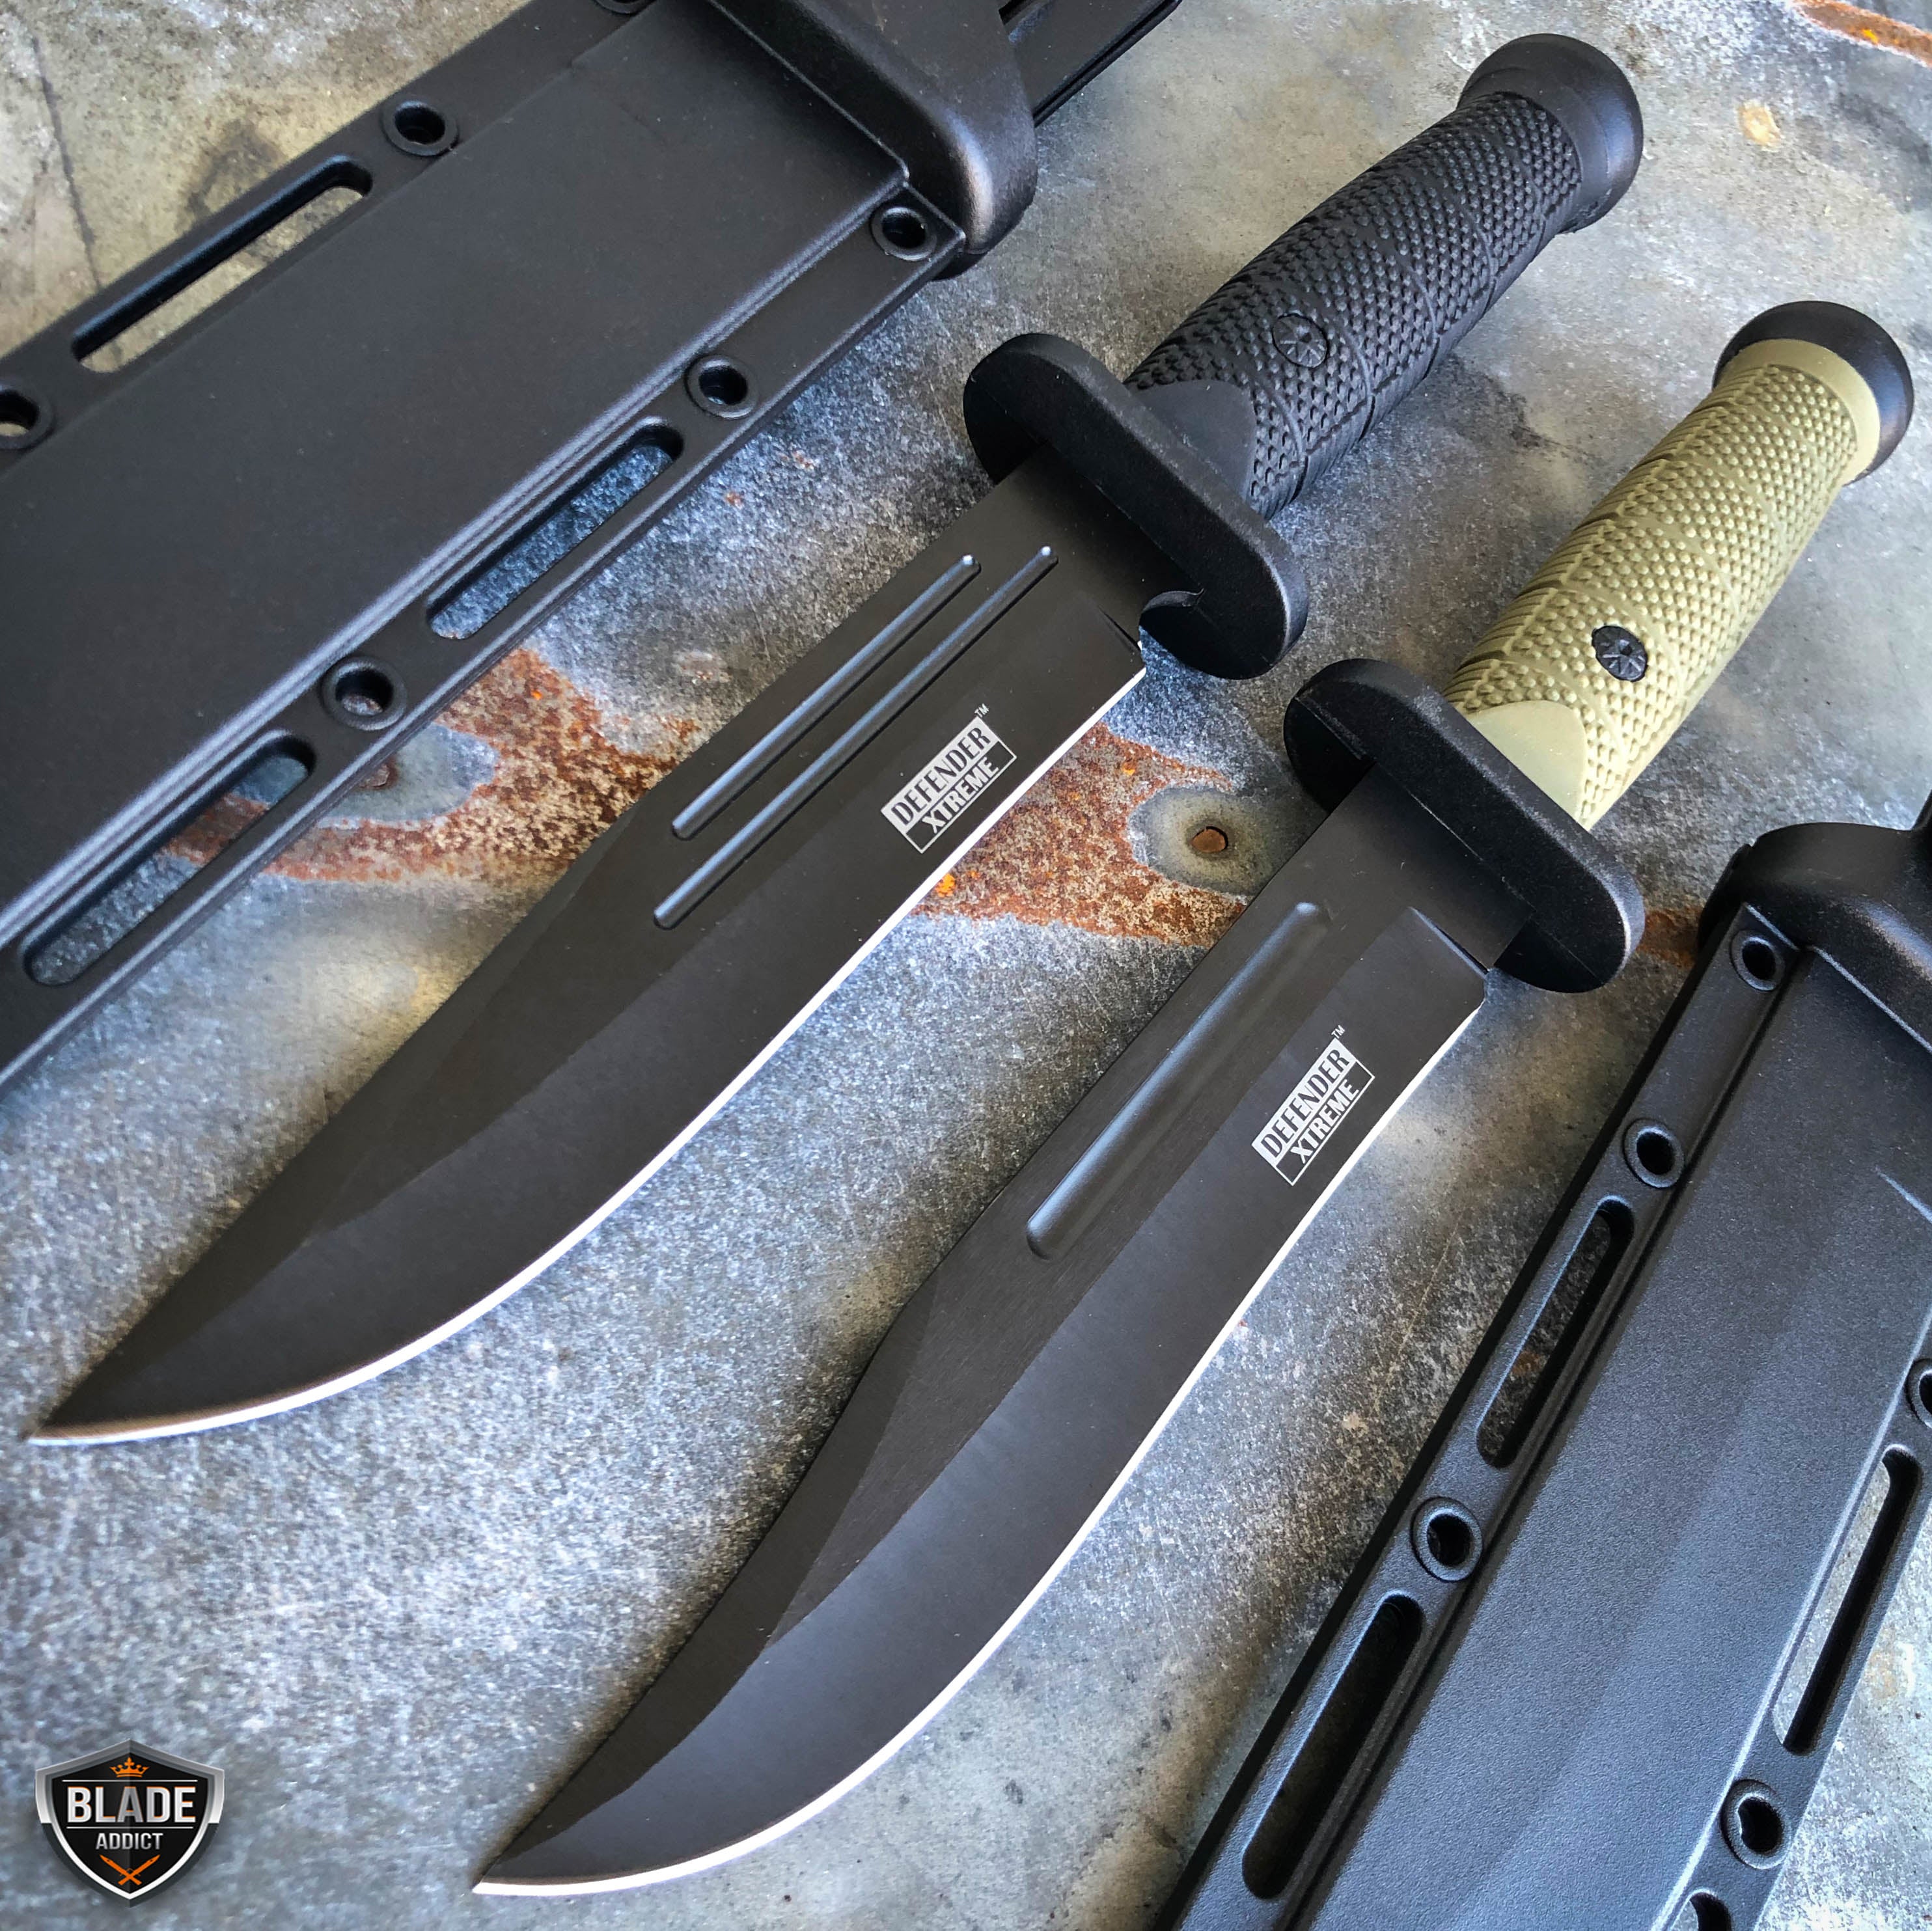 12 Tactical Camping Hunting Rambo Fixed Blade Knife Chrome Bowie +  Survival KIT - MEGAKNIFE